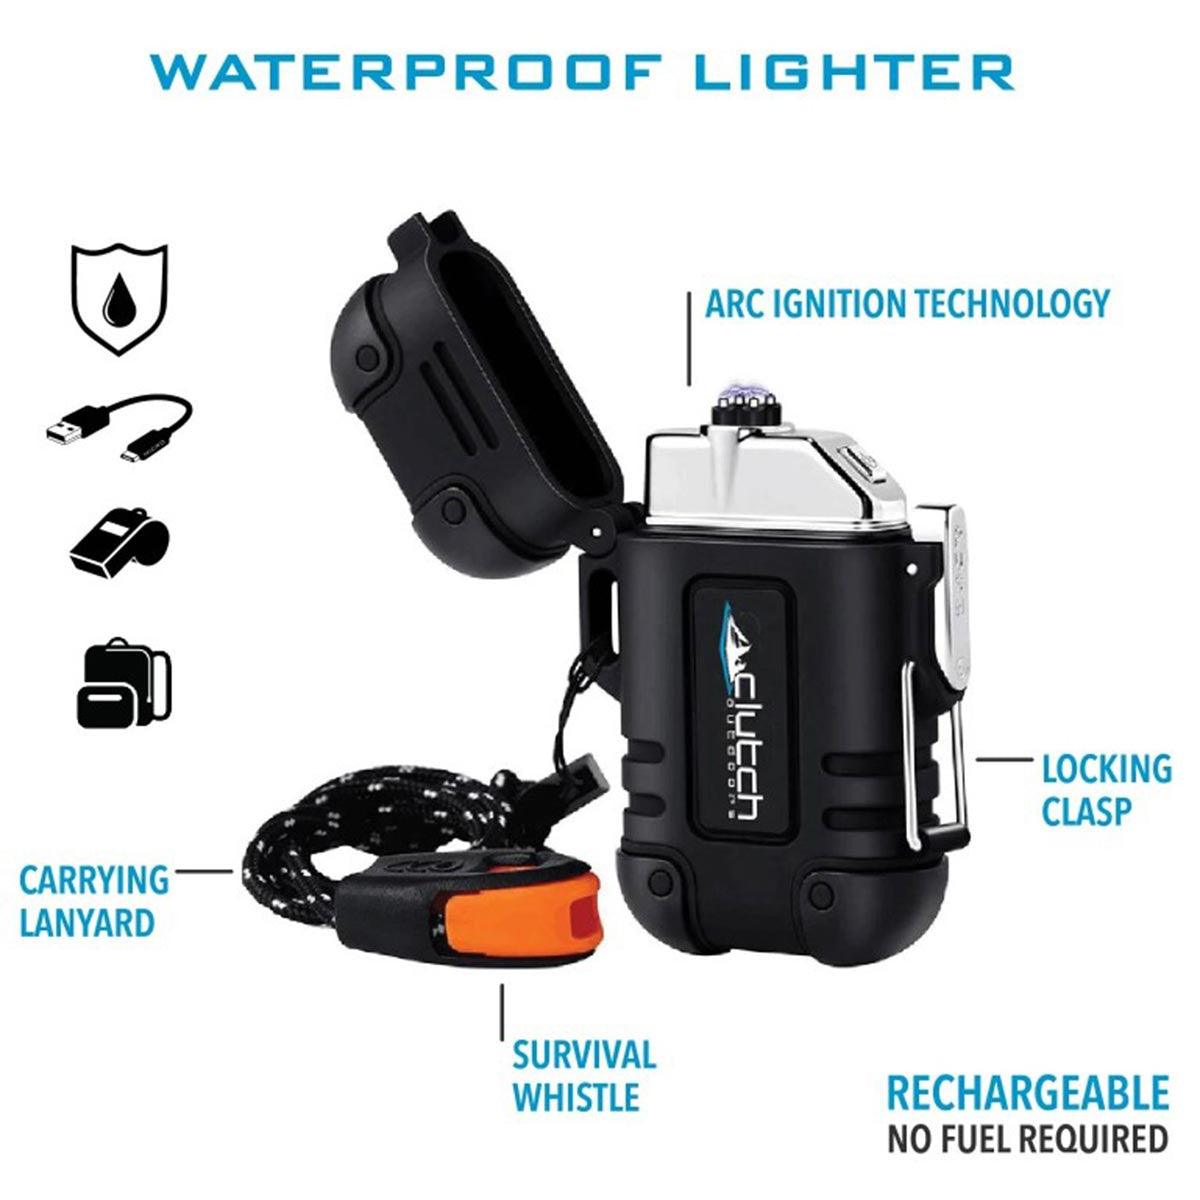 Clutch Outdoors Waterproof & Rechargeable Lighter - Leapfrog Outdoor Sports and Apparel